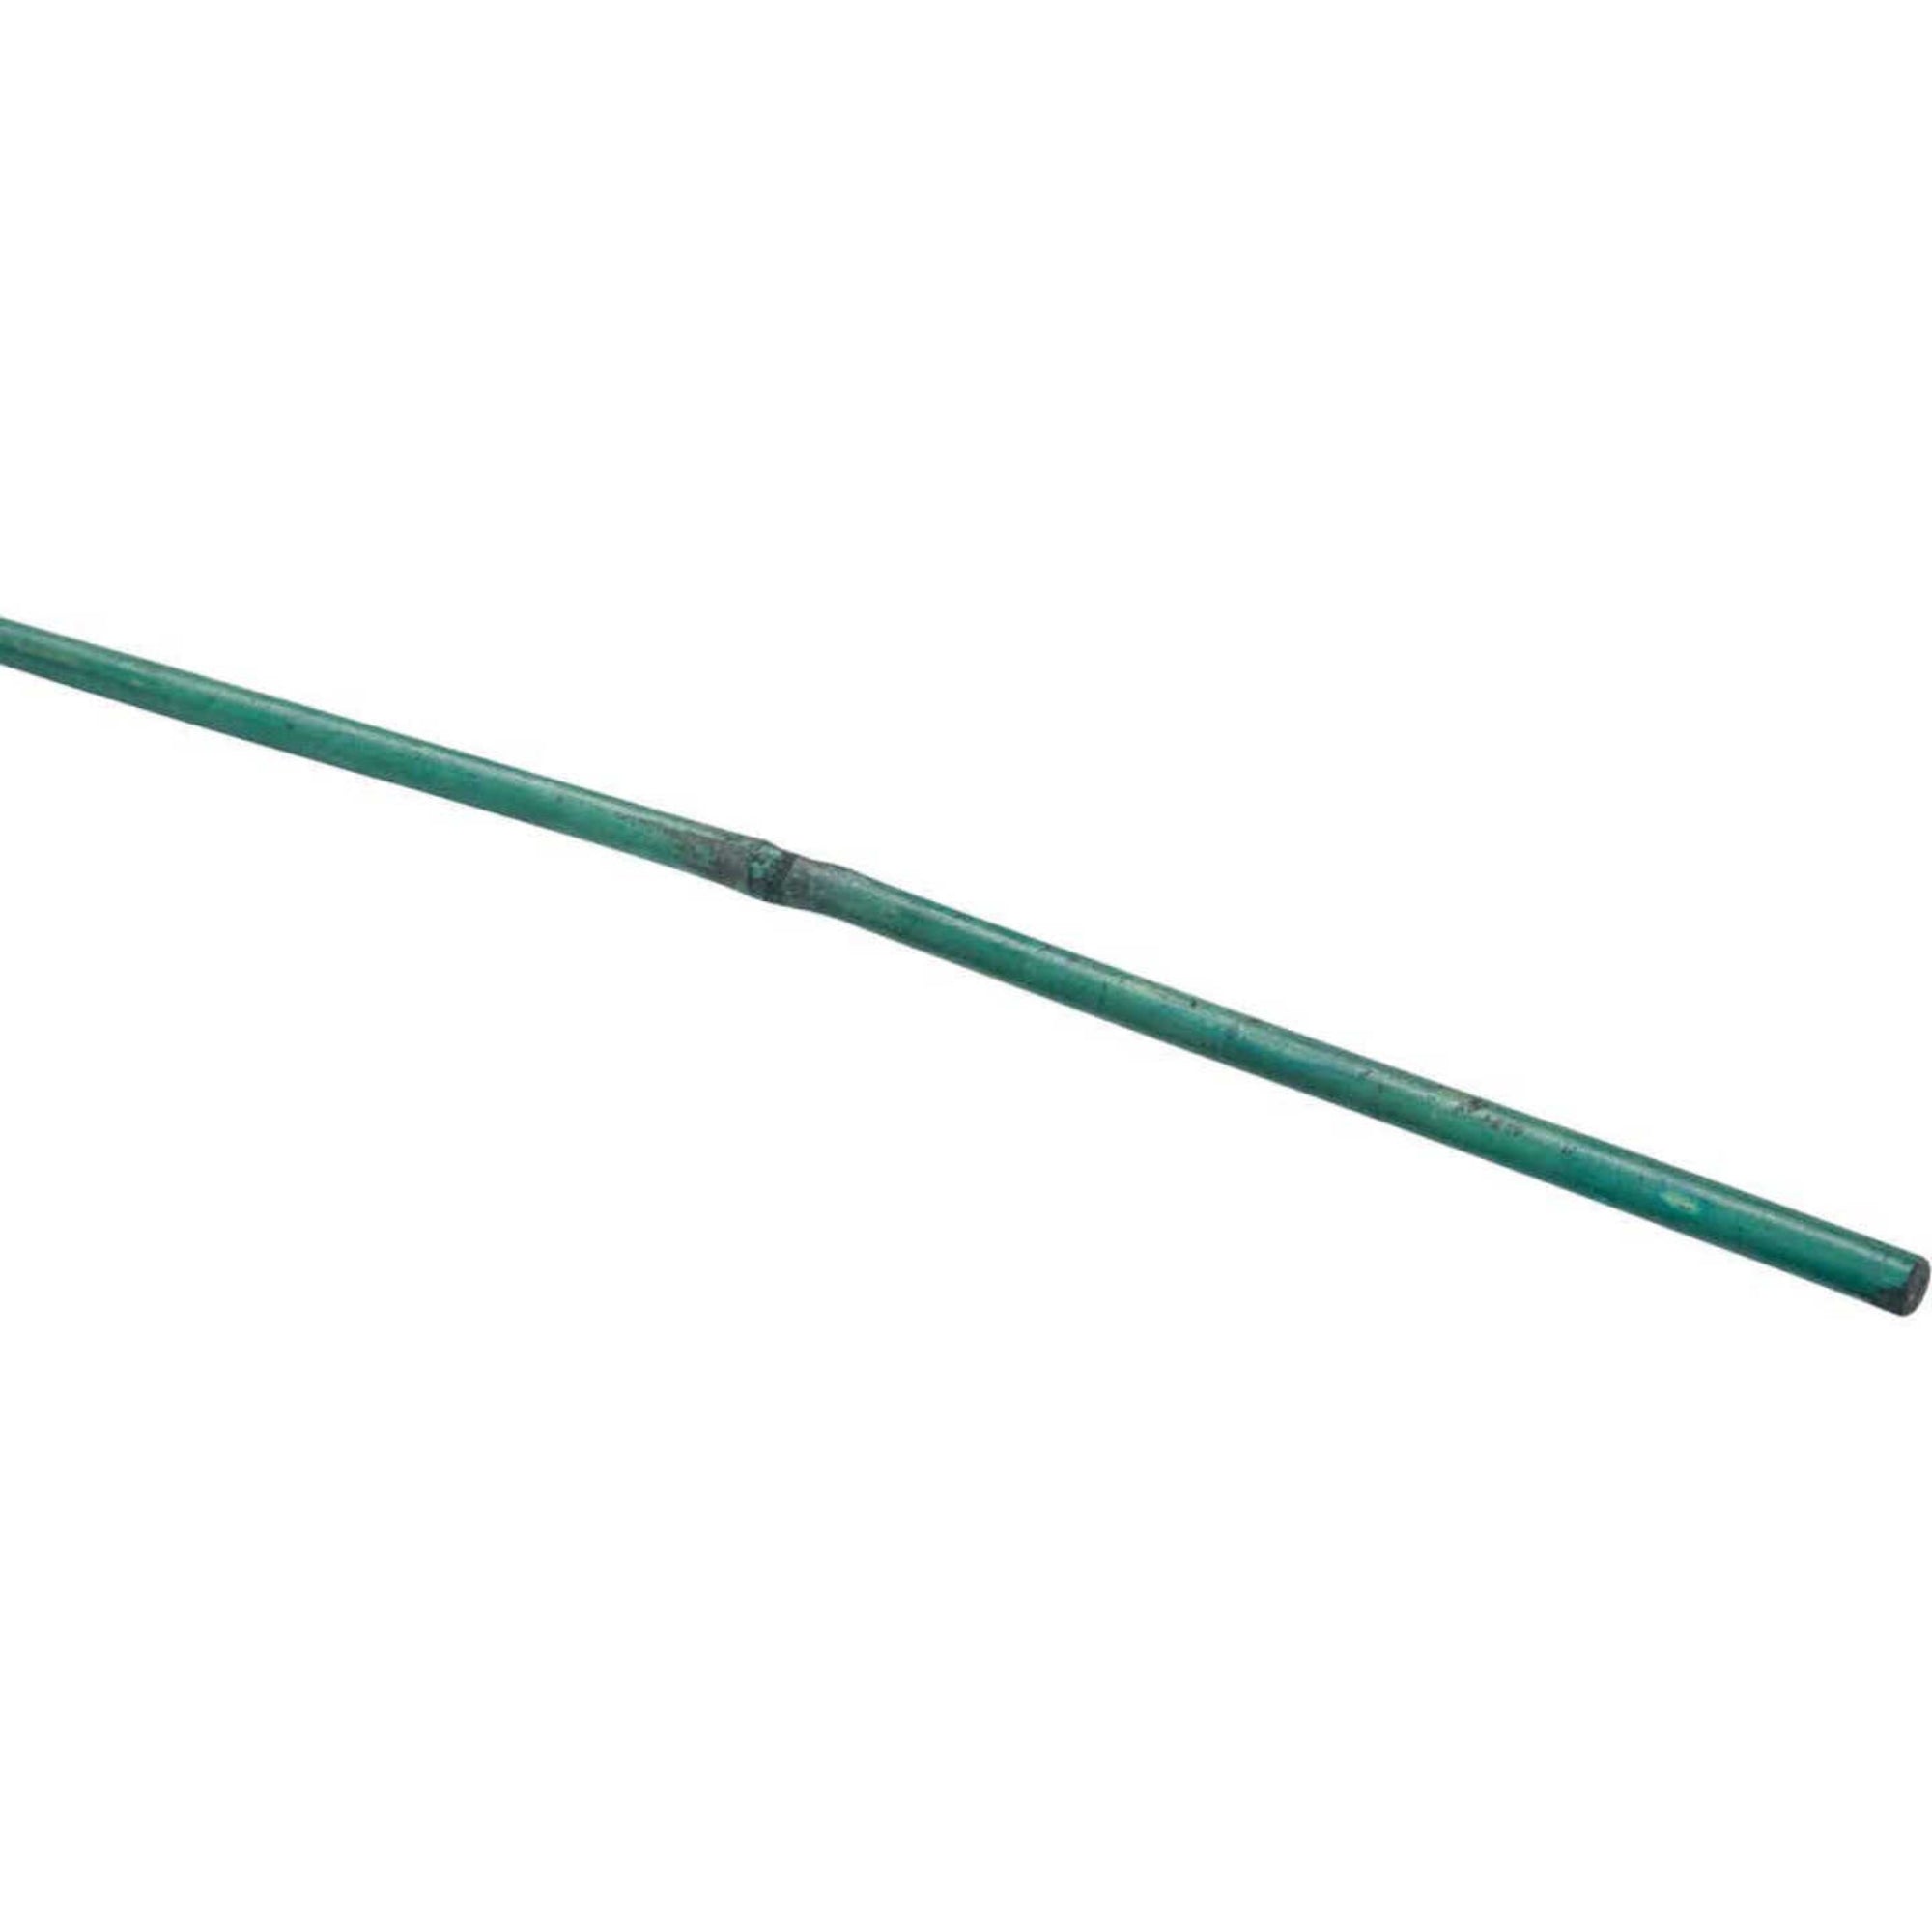 Bond 3-Foot Bamboo Stakes, 25 Pack